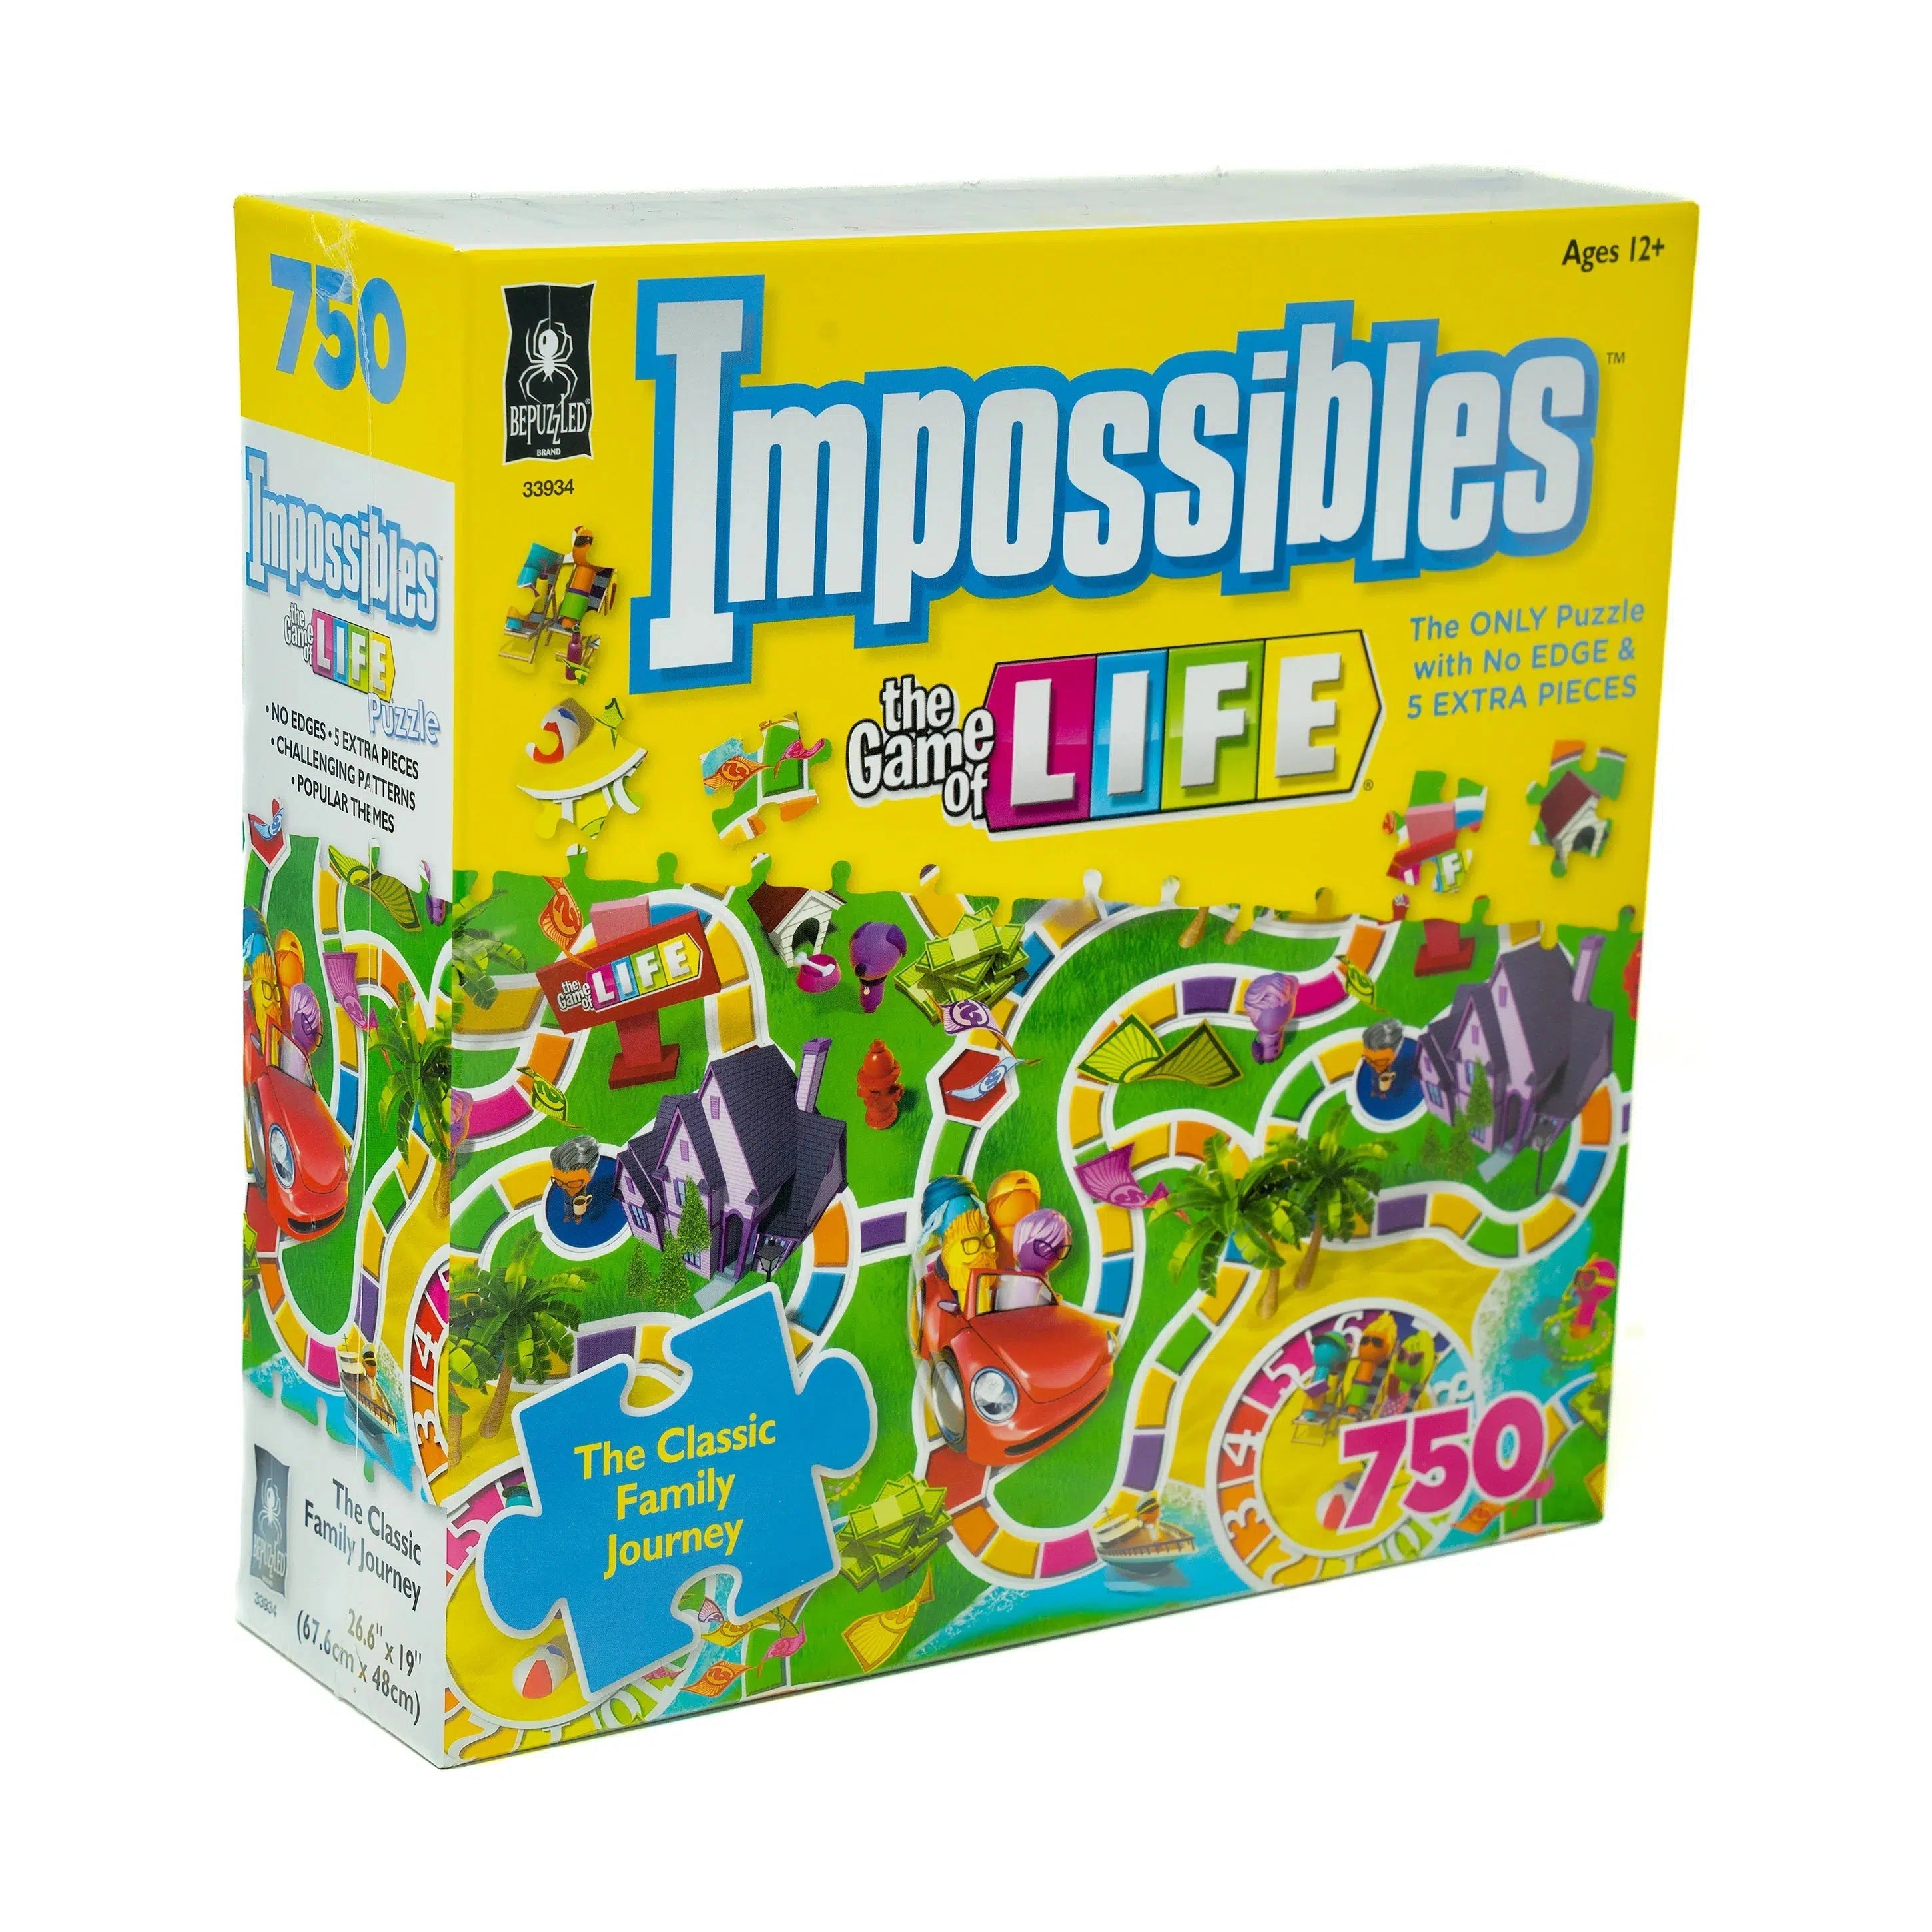 University Games-Impossibles Game Of Life 750 Piece Puzzle-33934-Legacy Toys